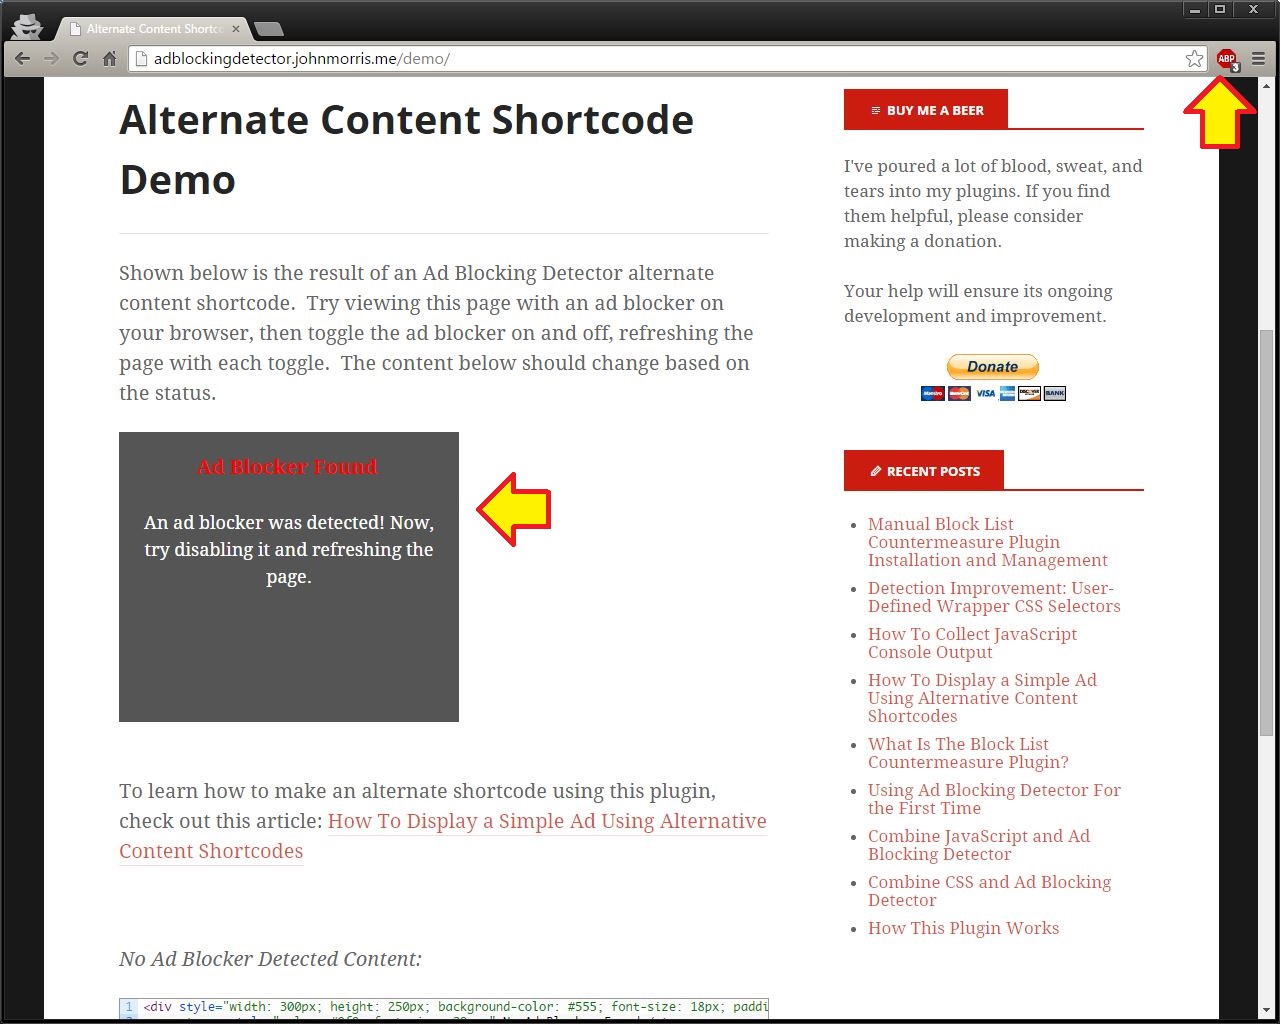 Demo of Alternative Shortcode w/ Enabled Ad Blocker ([click here to test a live demo](http://adblockingdetector.johnmorris.me/demo/))